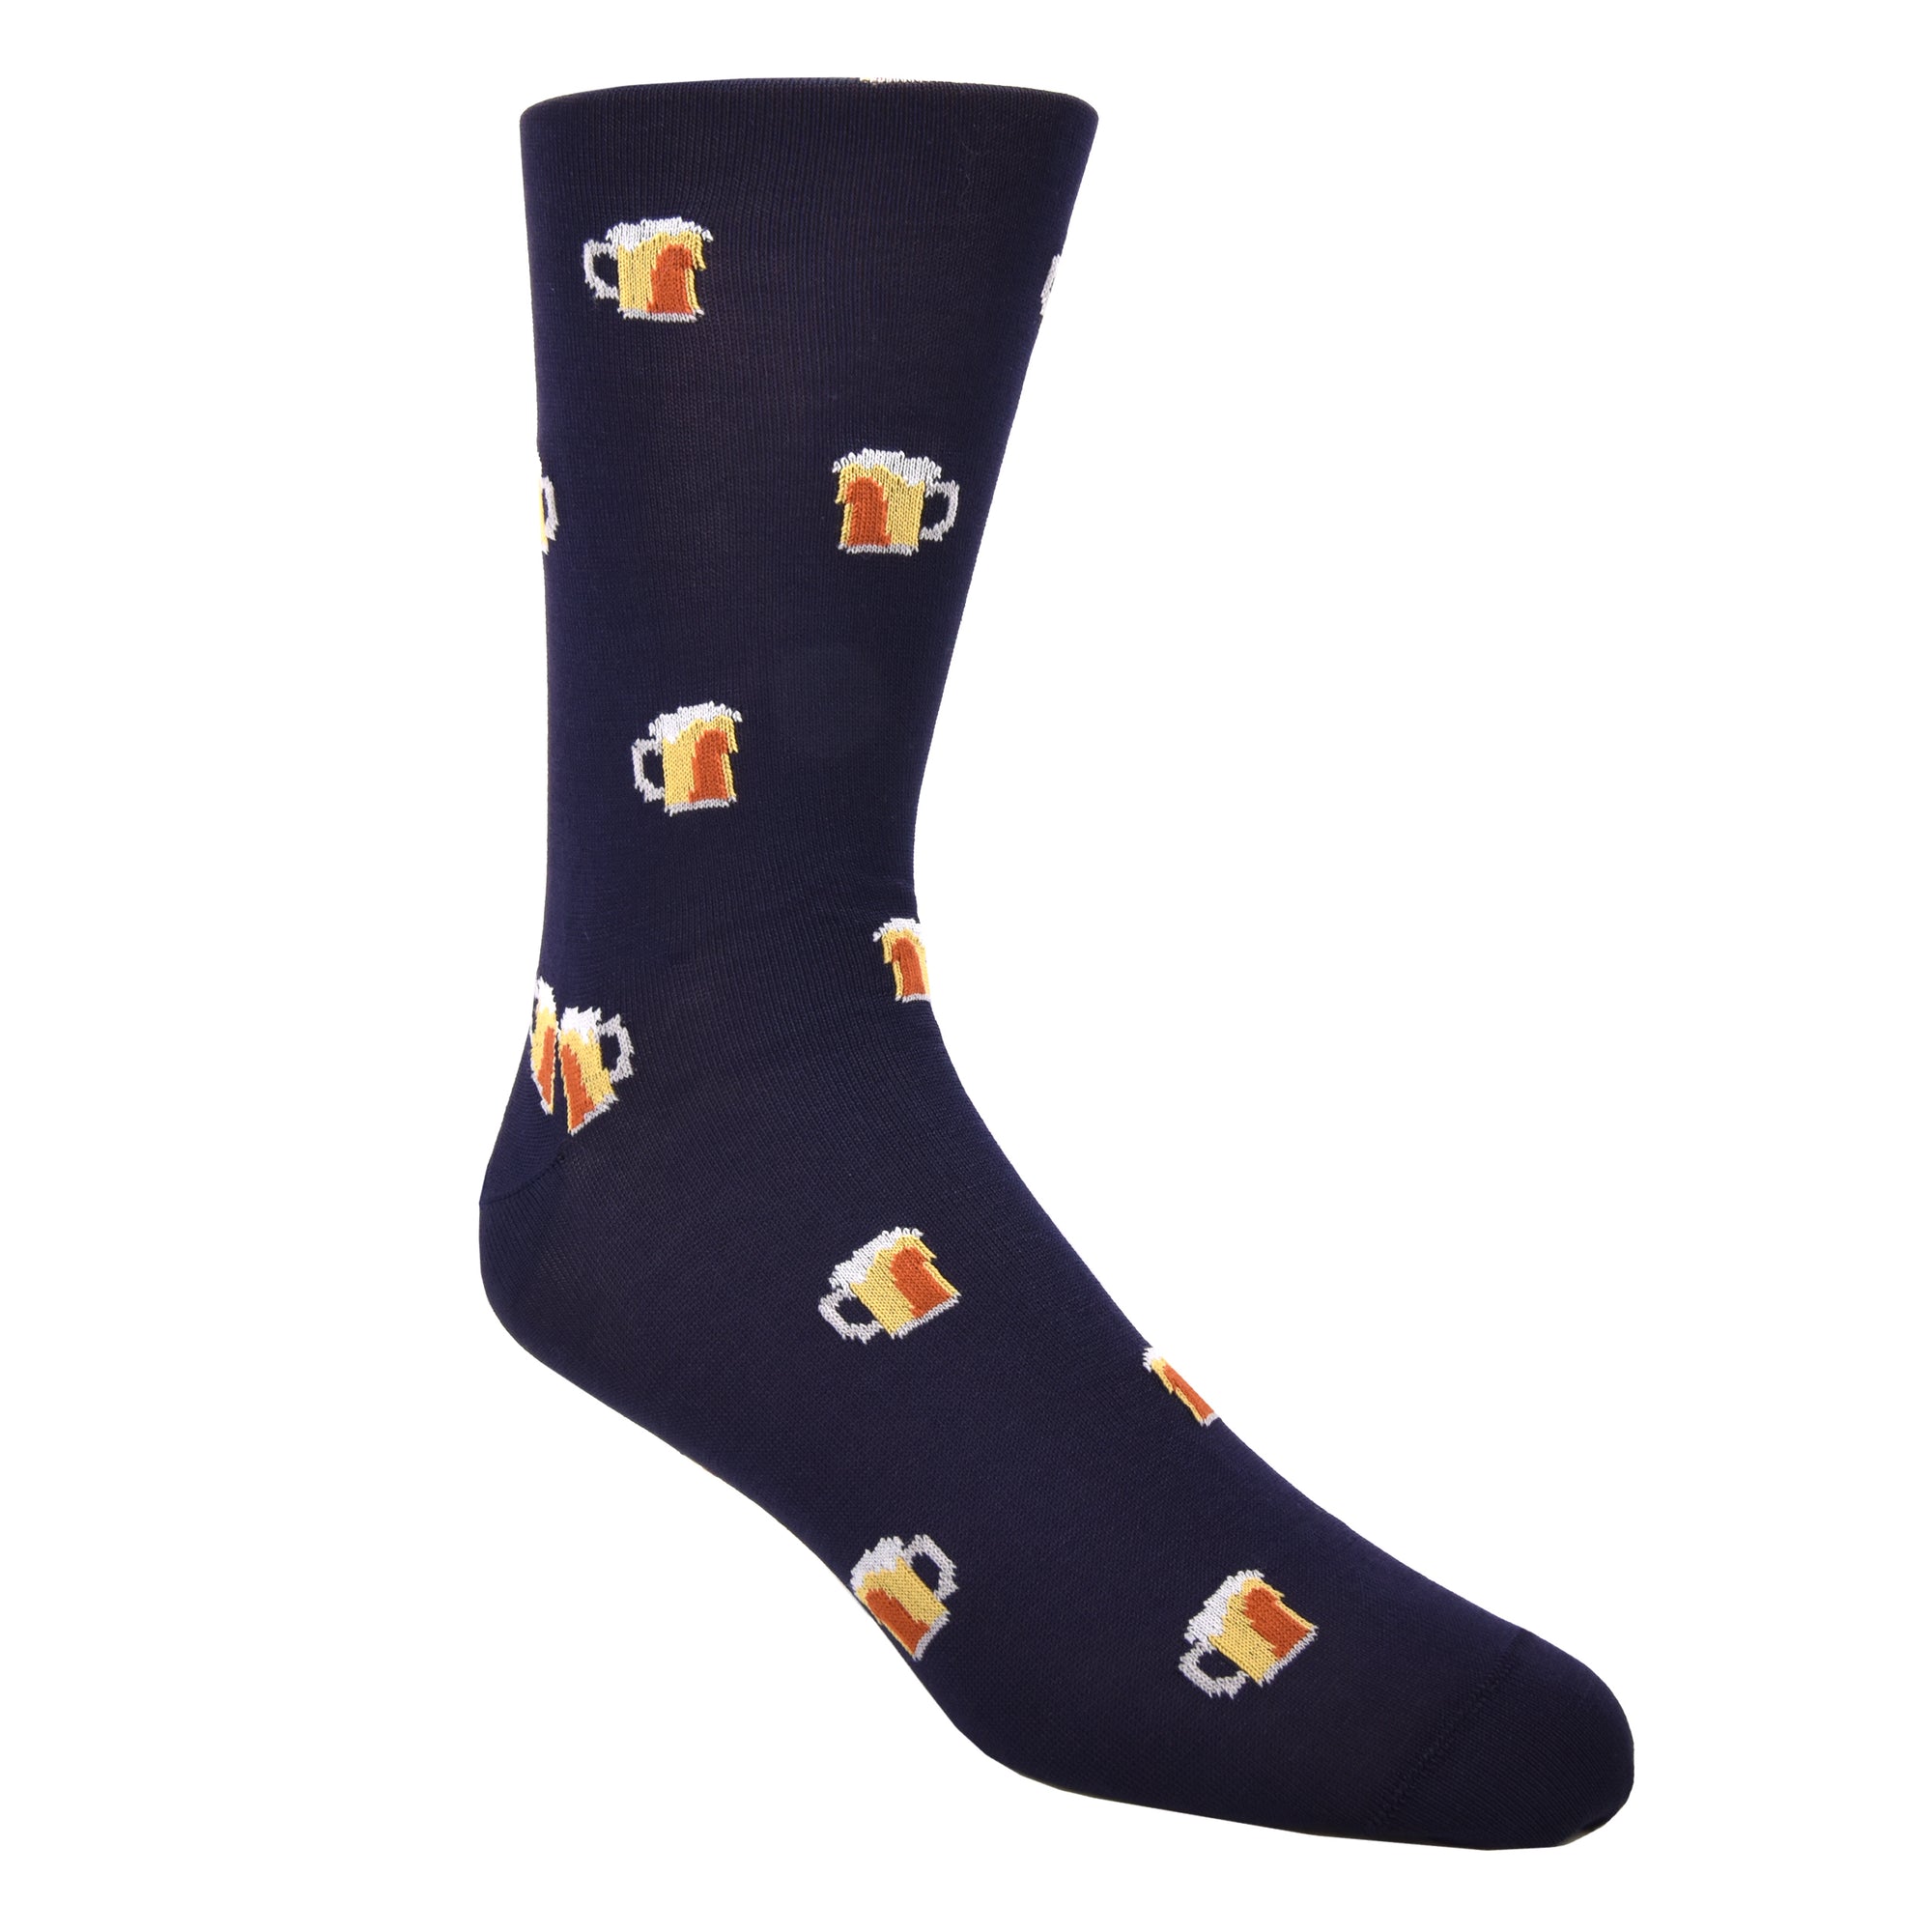 Celebrate the best hour of the day in happy hour sock style. Life is too short to wear boring socks! #damnright 70% Mercerized Cotton 29% Nylon 1% Spandex Fits Size 8-12 Machine Washable Made in the USA